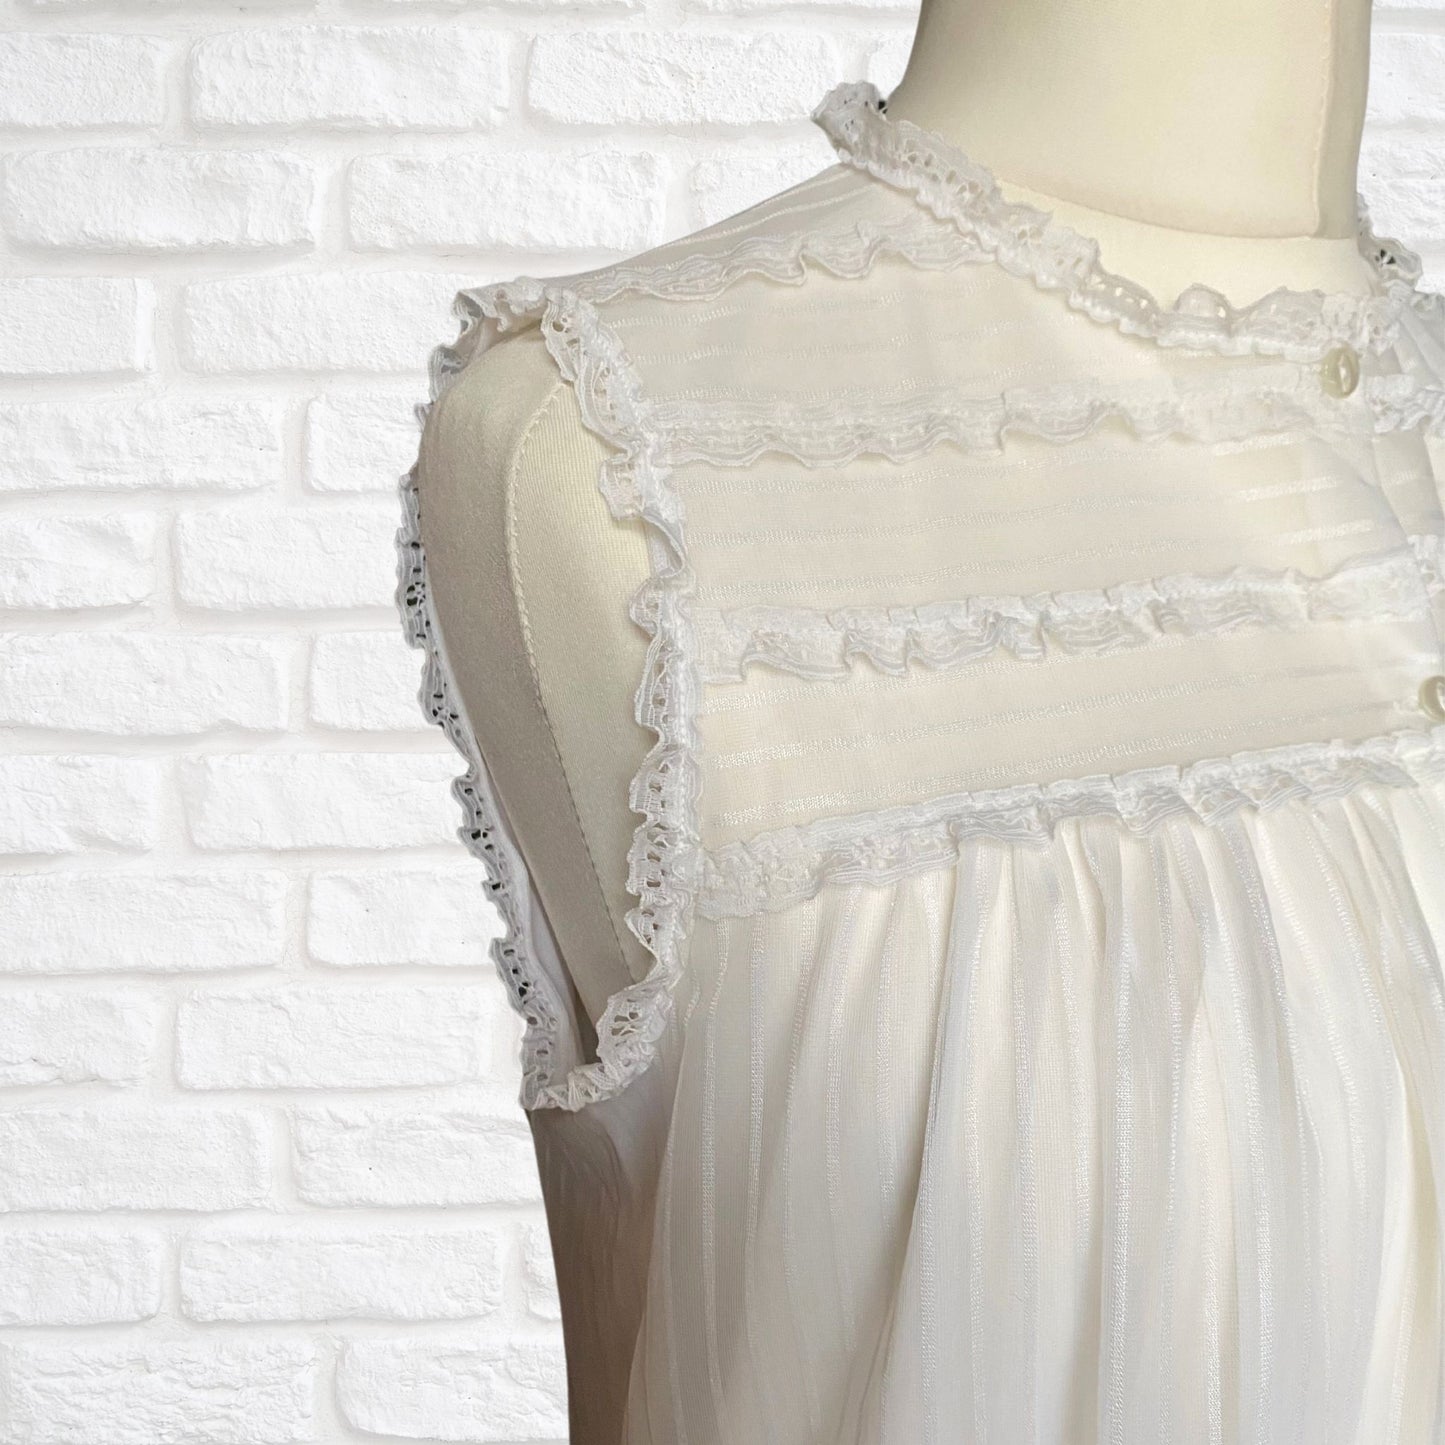 Vintage 60s Frilly White Babydoll Nightdress - Retro Sleeveless Smock Style  Gown.Approx UK size 12-14